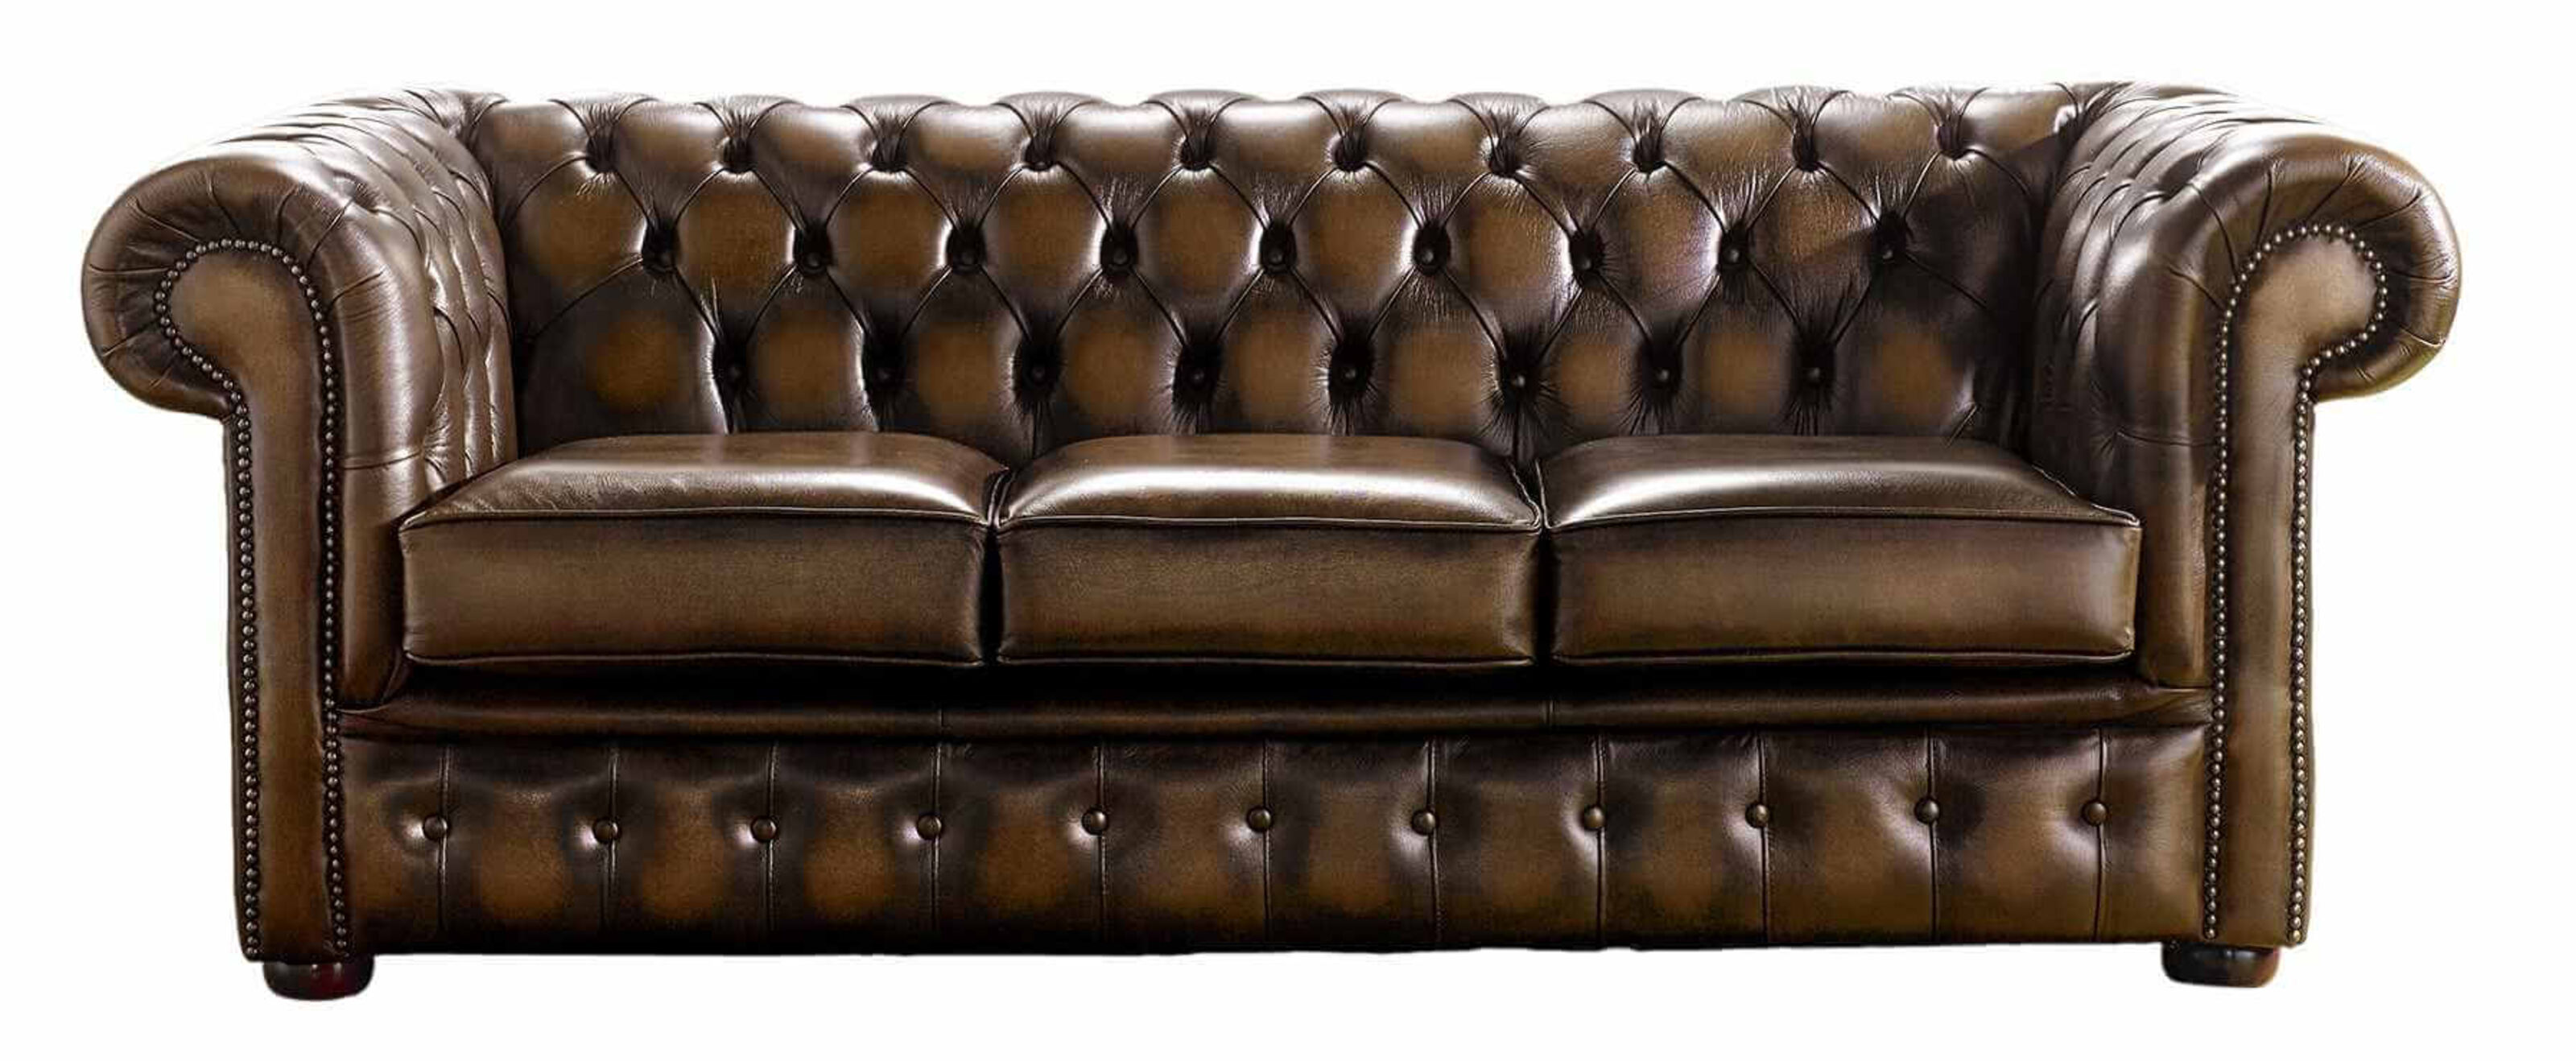 Chesterfield Sofas and the Enchanting Button Mystery  %Post Title